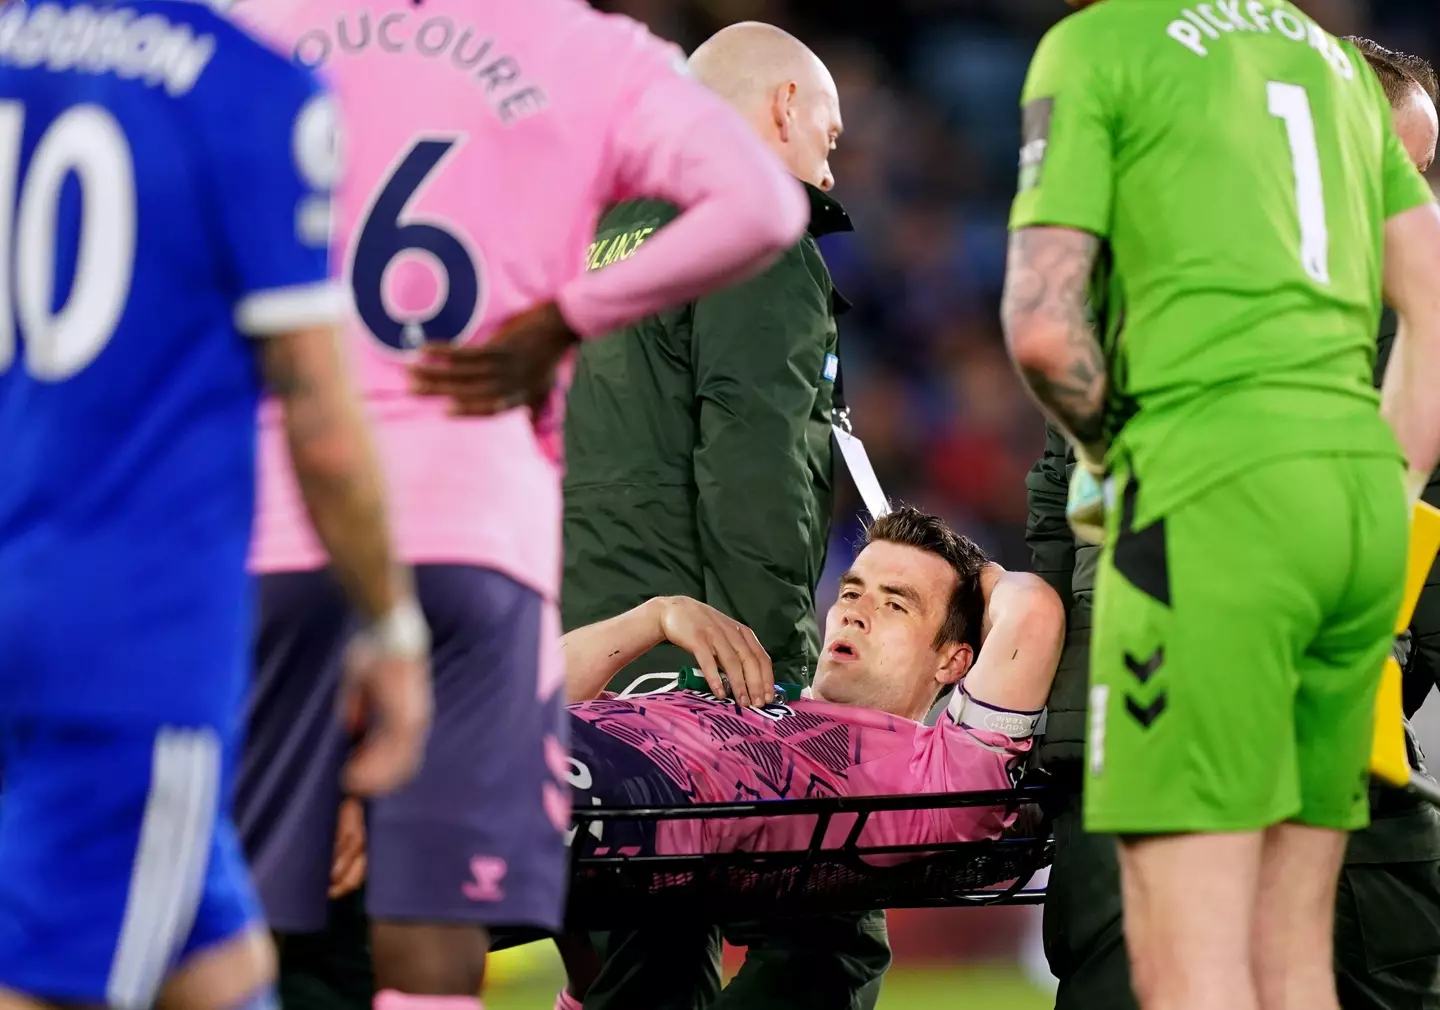 Coleman is stretchered off. Image: Alamy